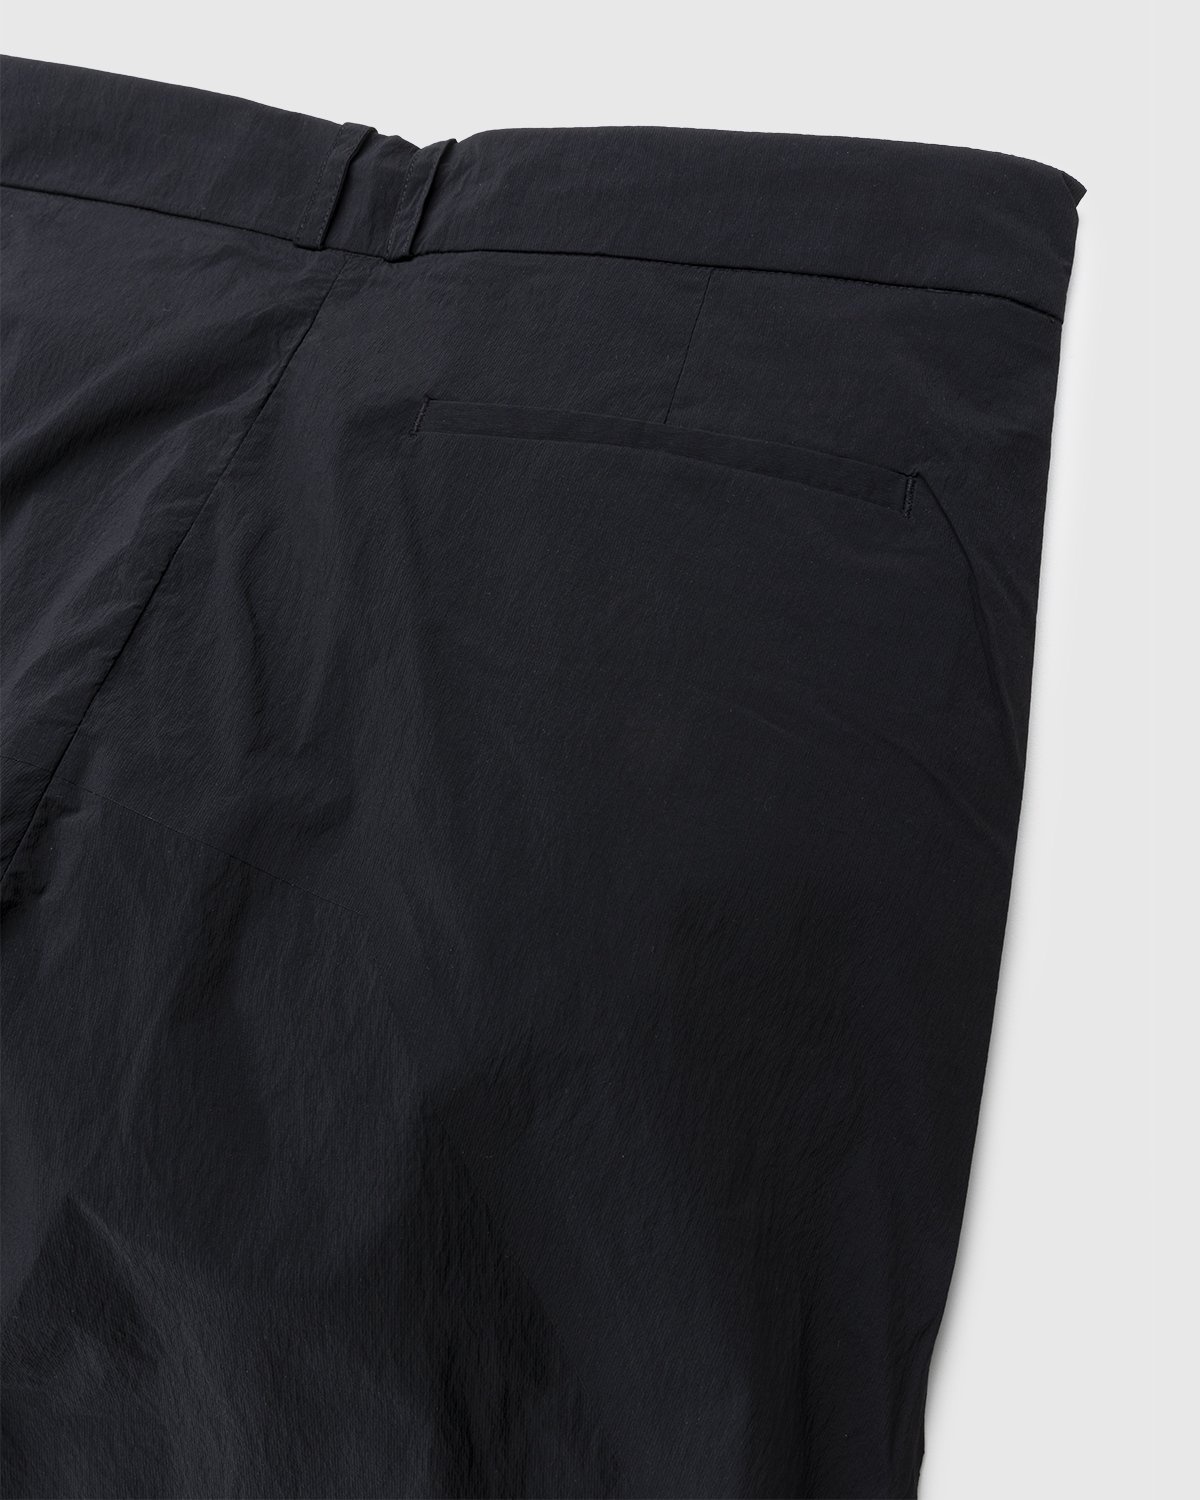 A-Cold-Wall* – Stealth Nylon Pants Black - Trousers - Black - Image 3